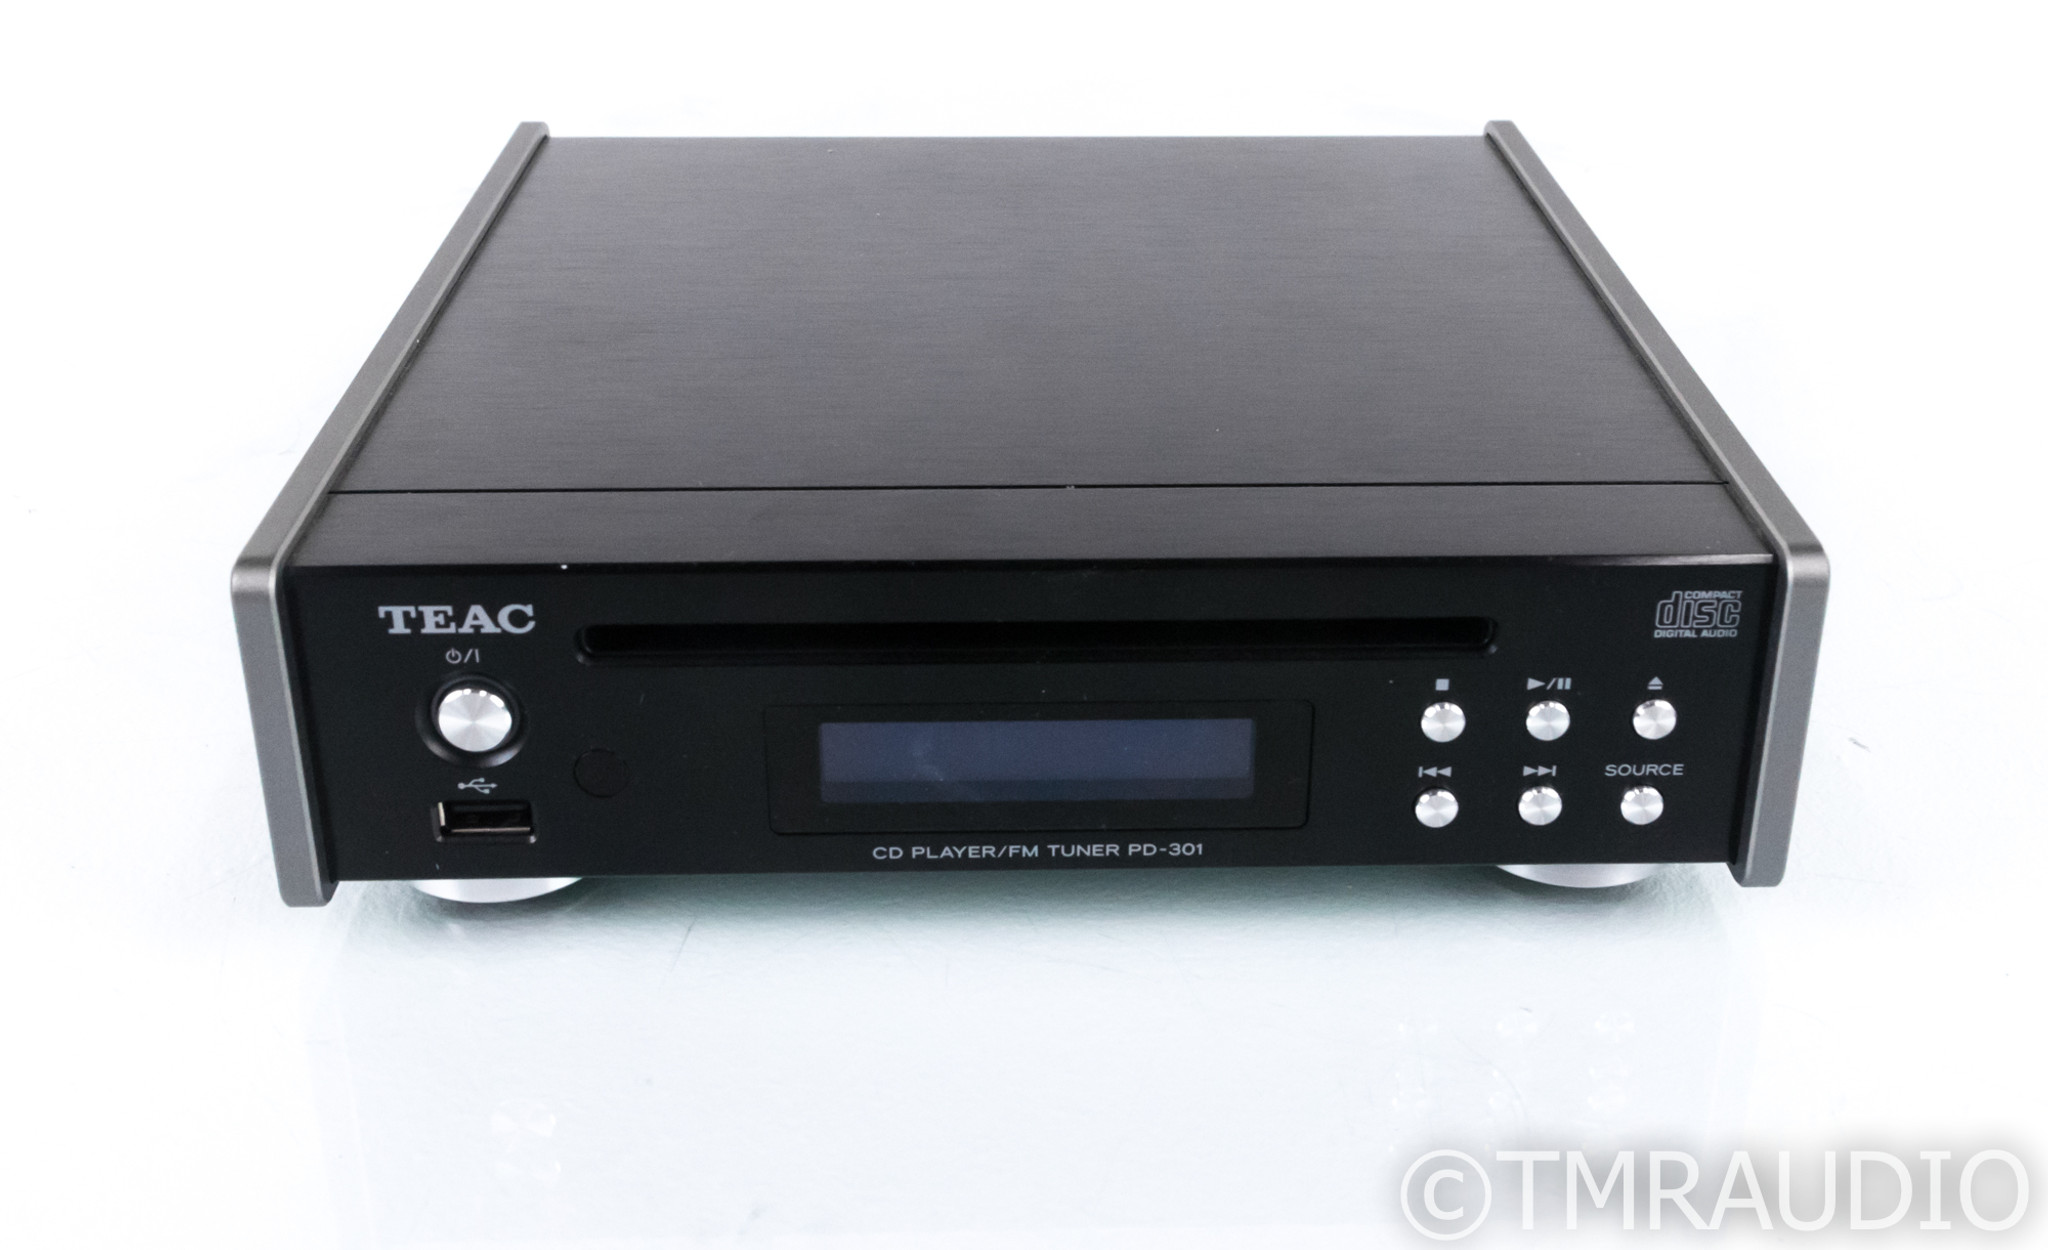 Teac PD-301 CD Player / FM Tuner; PD301; Remote